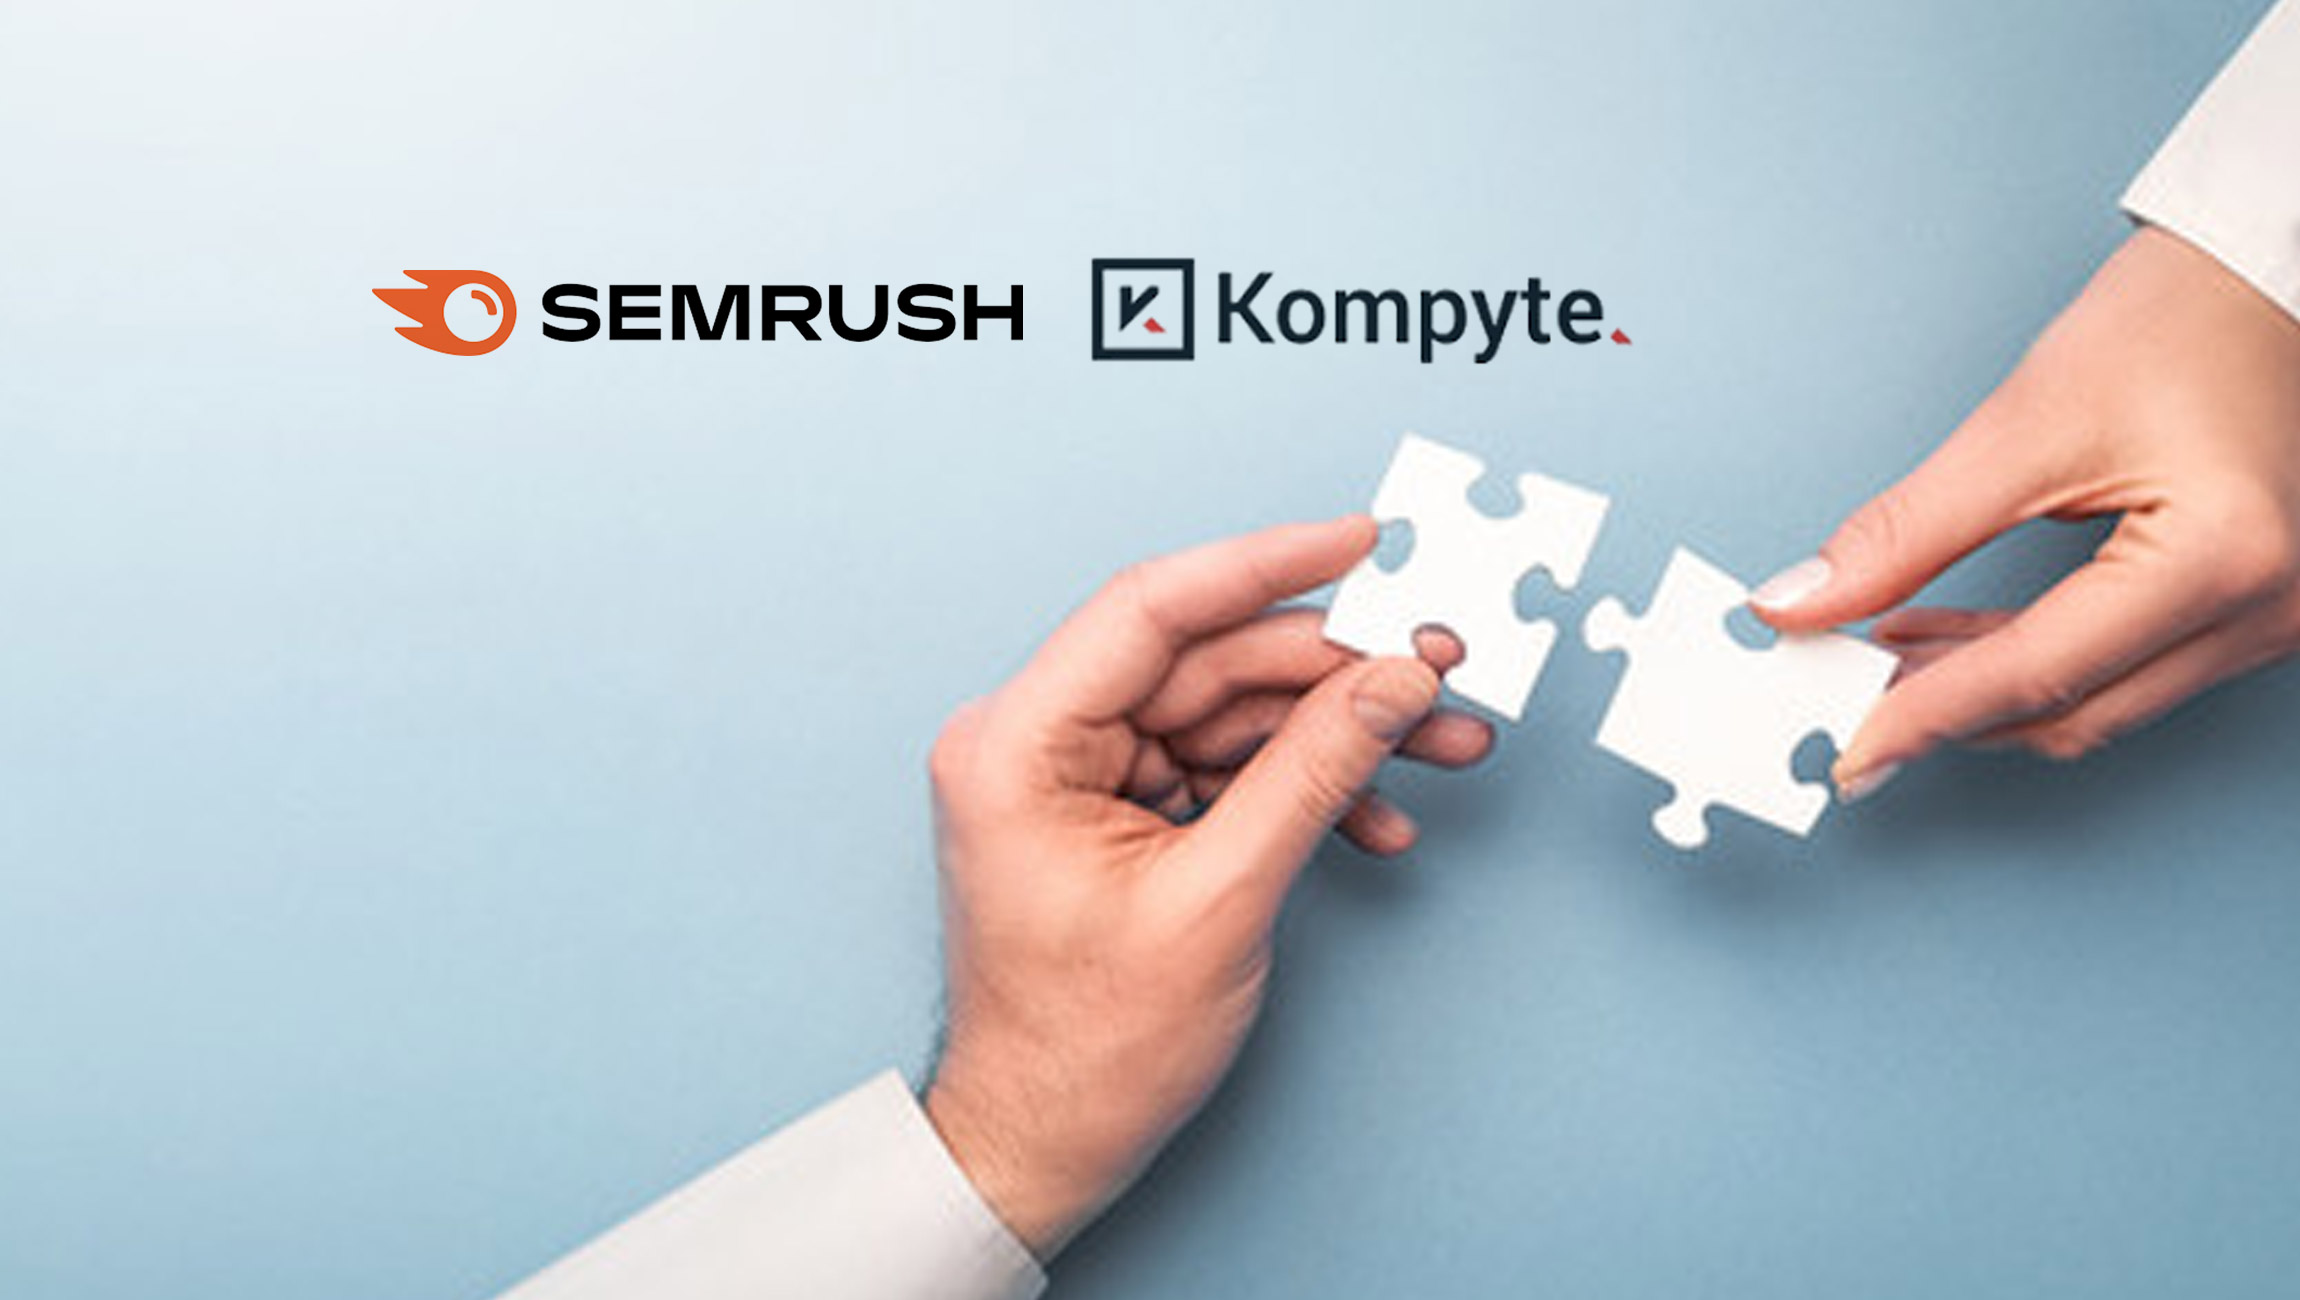 Semrush-To-Acquire-Kompyte_-Enhance-Competitive-Intelligence-And-Sales-Enablement-Capabilities